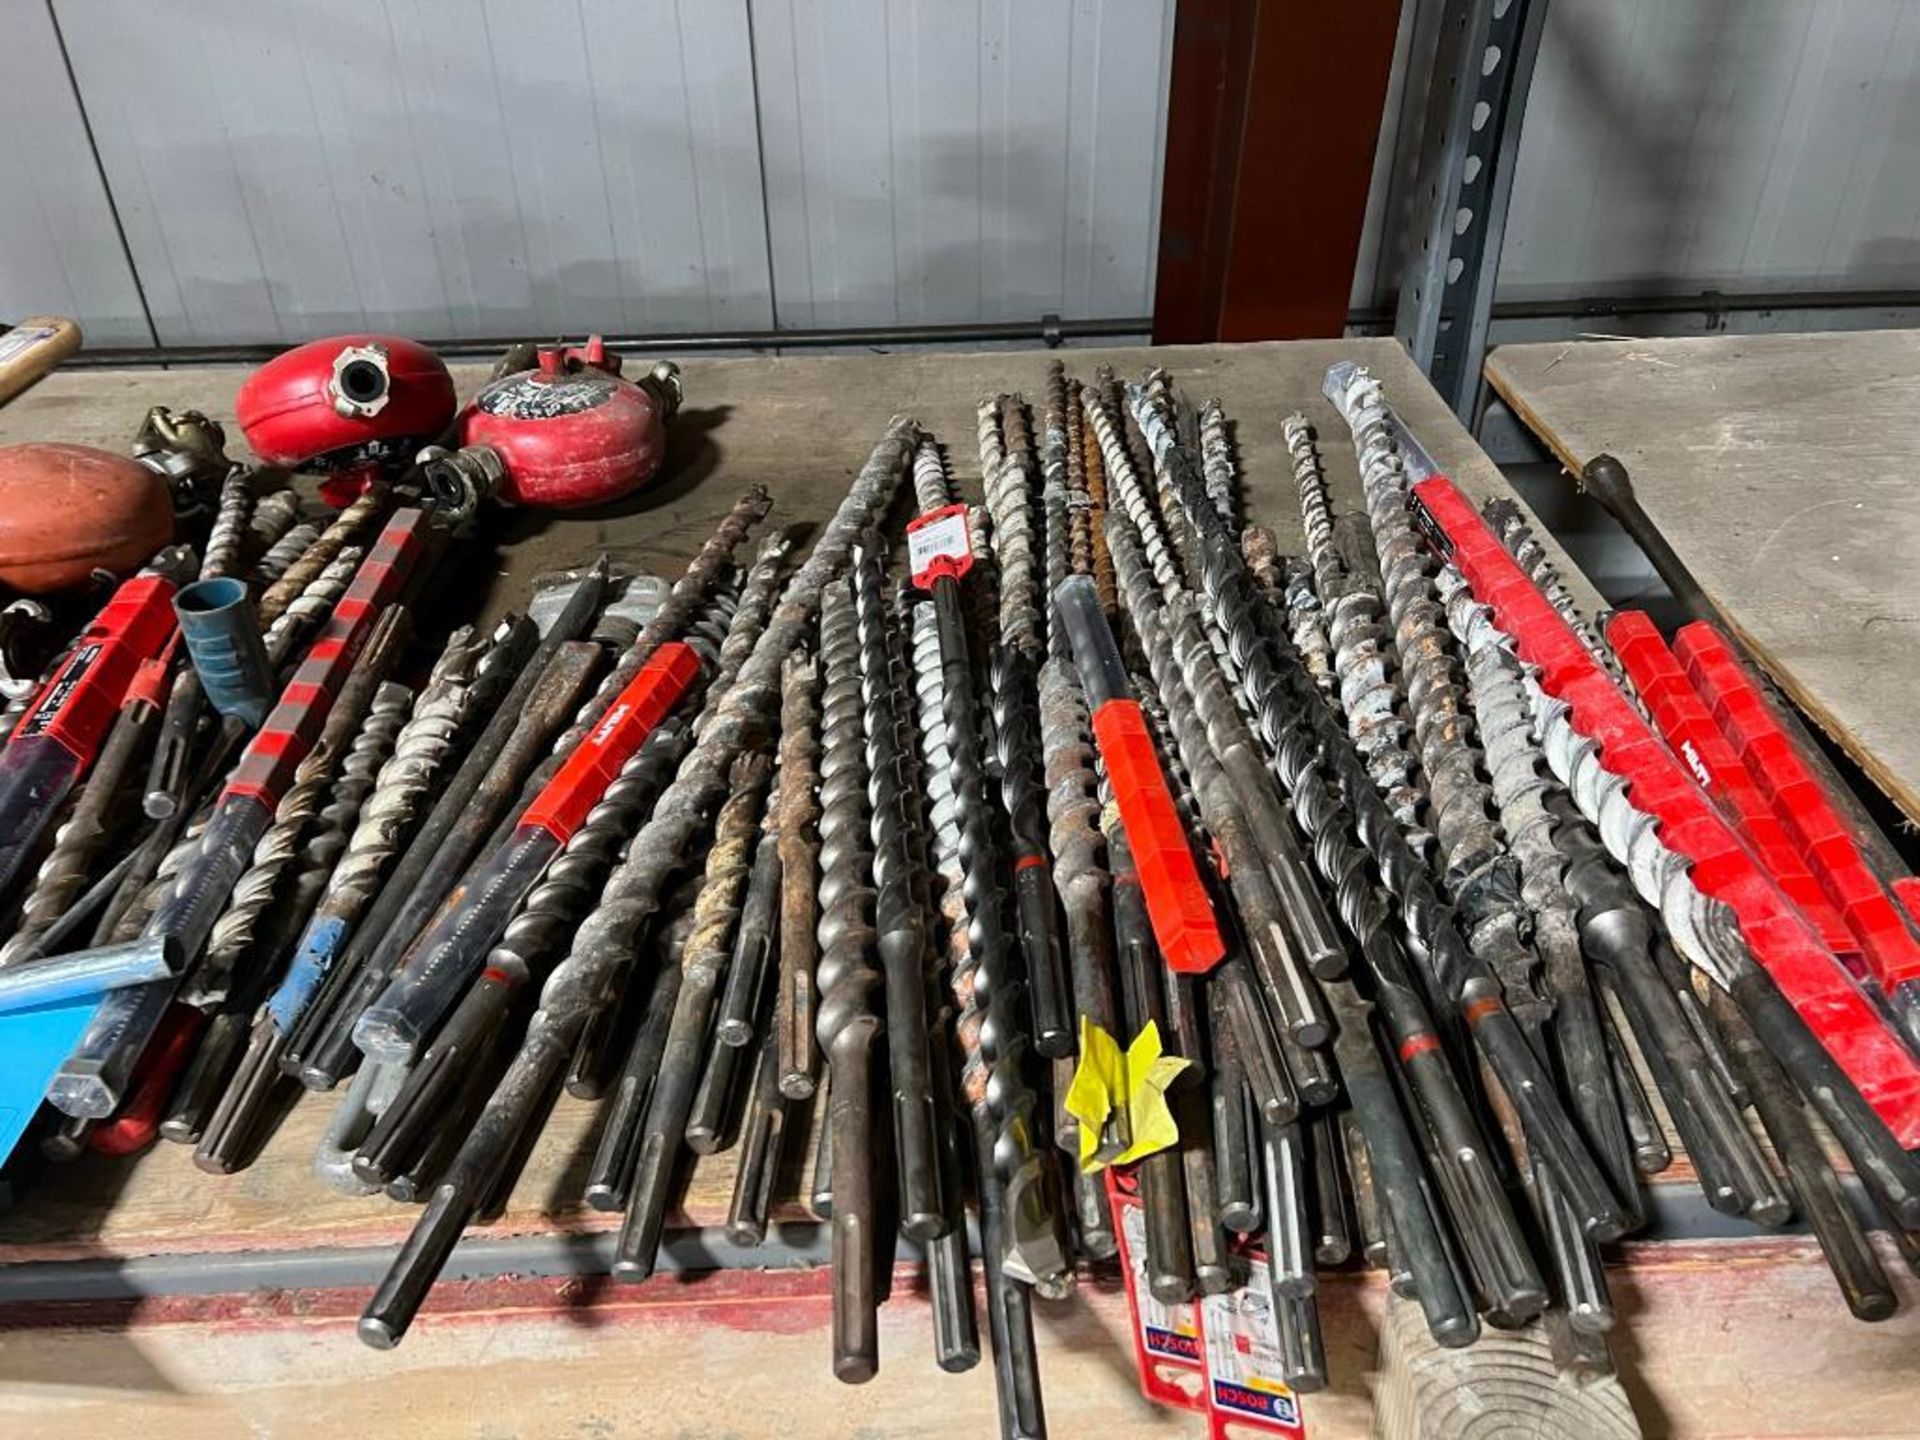 LOT Including: Jackhammer, vibrators, assorted drill bits, and misc. MRO - Image 2 of 3